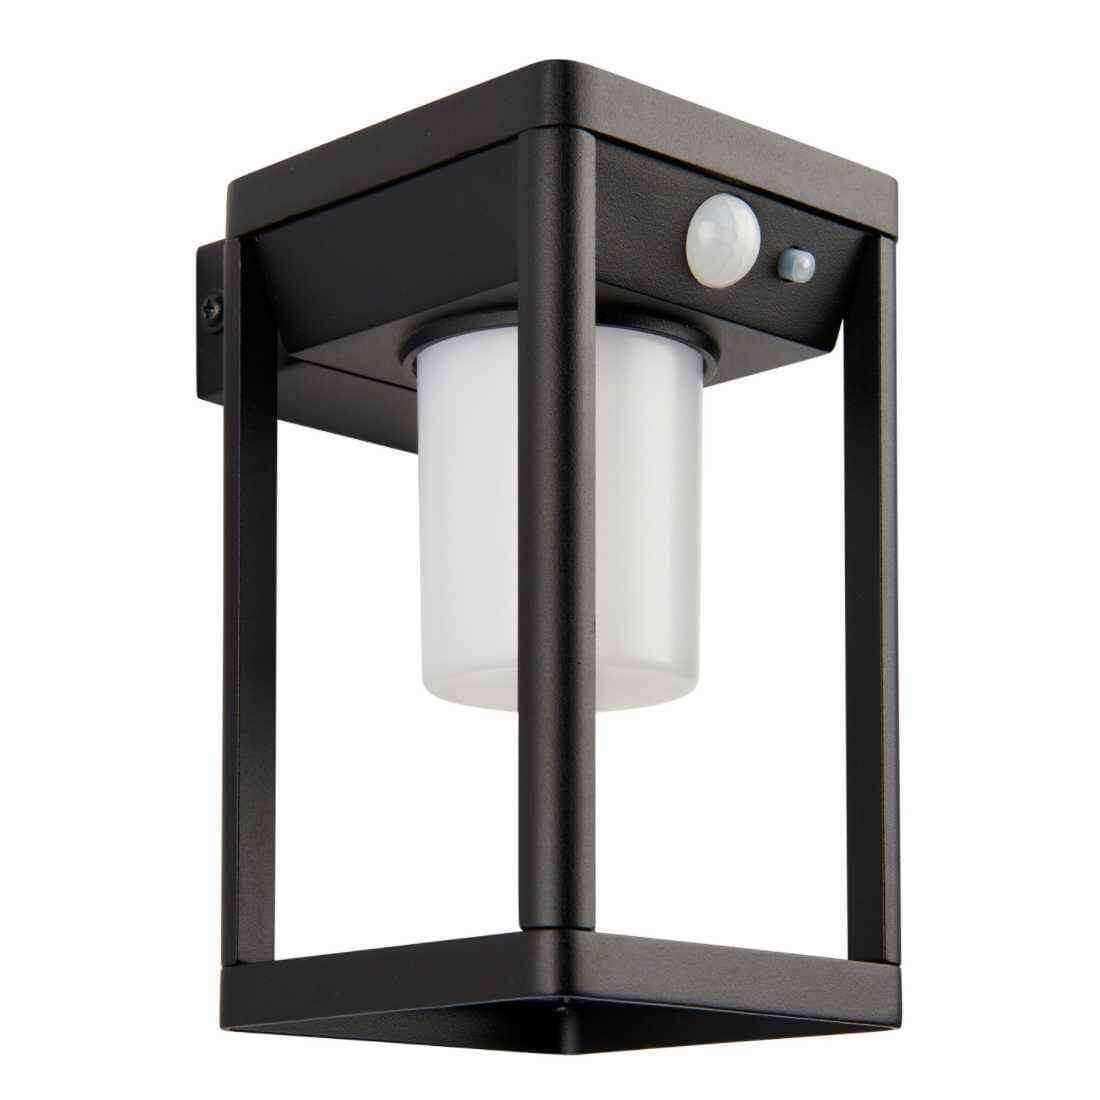 Contemporary Solar-Powered Exterior wall light - The Farthing